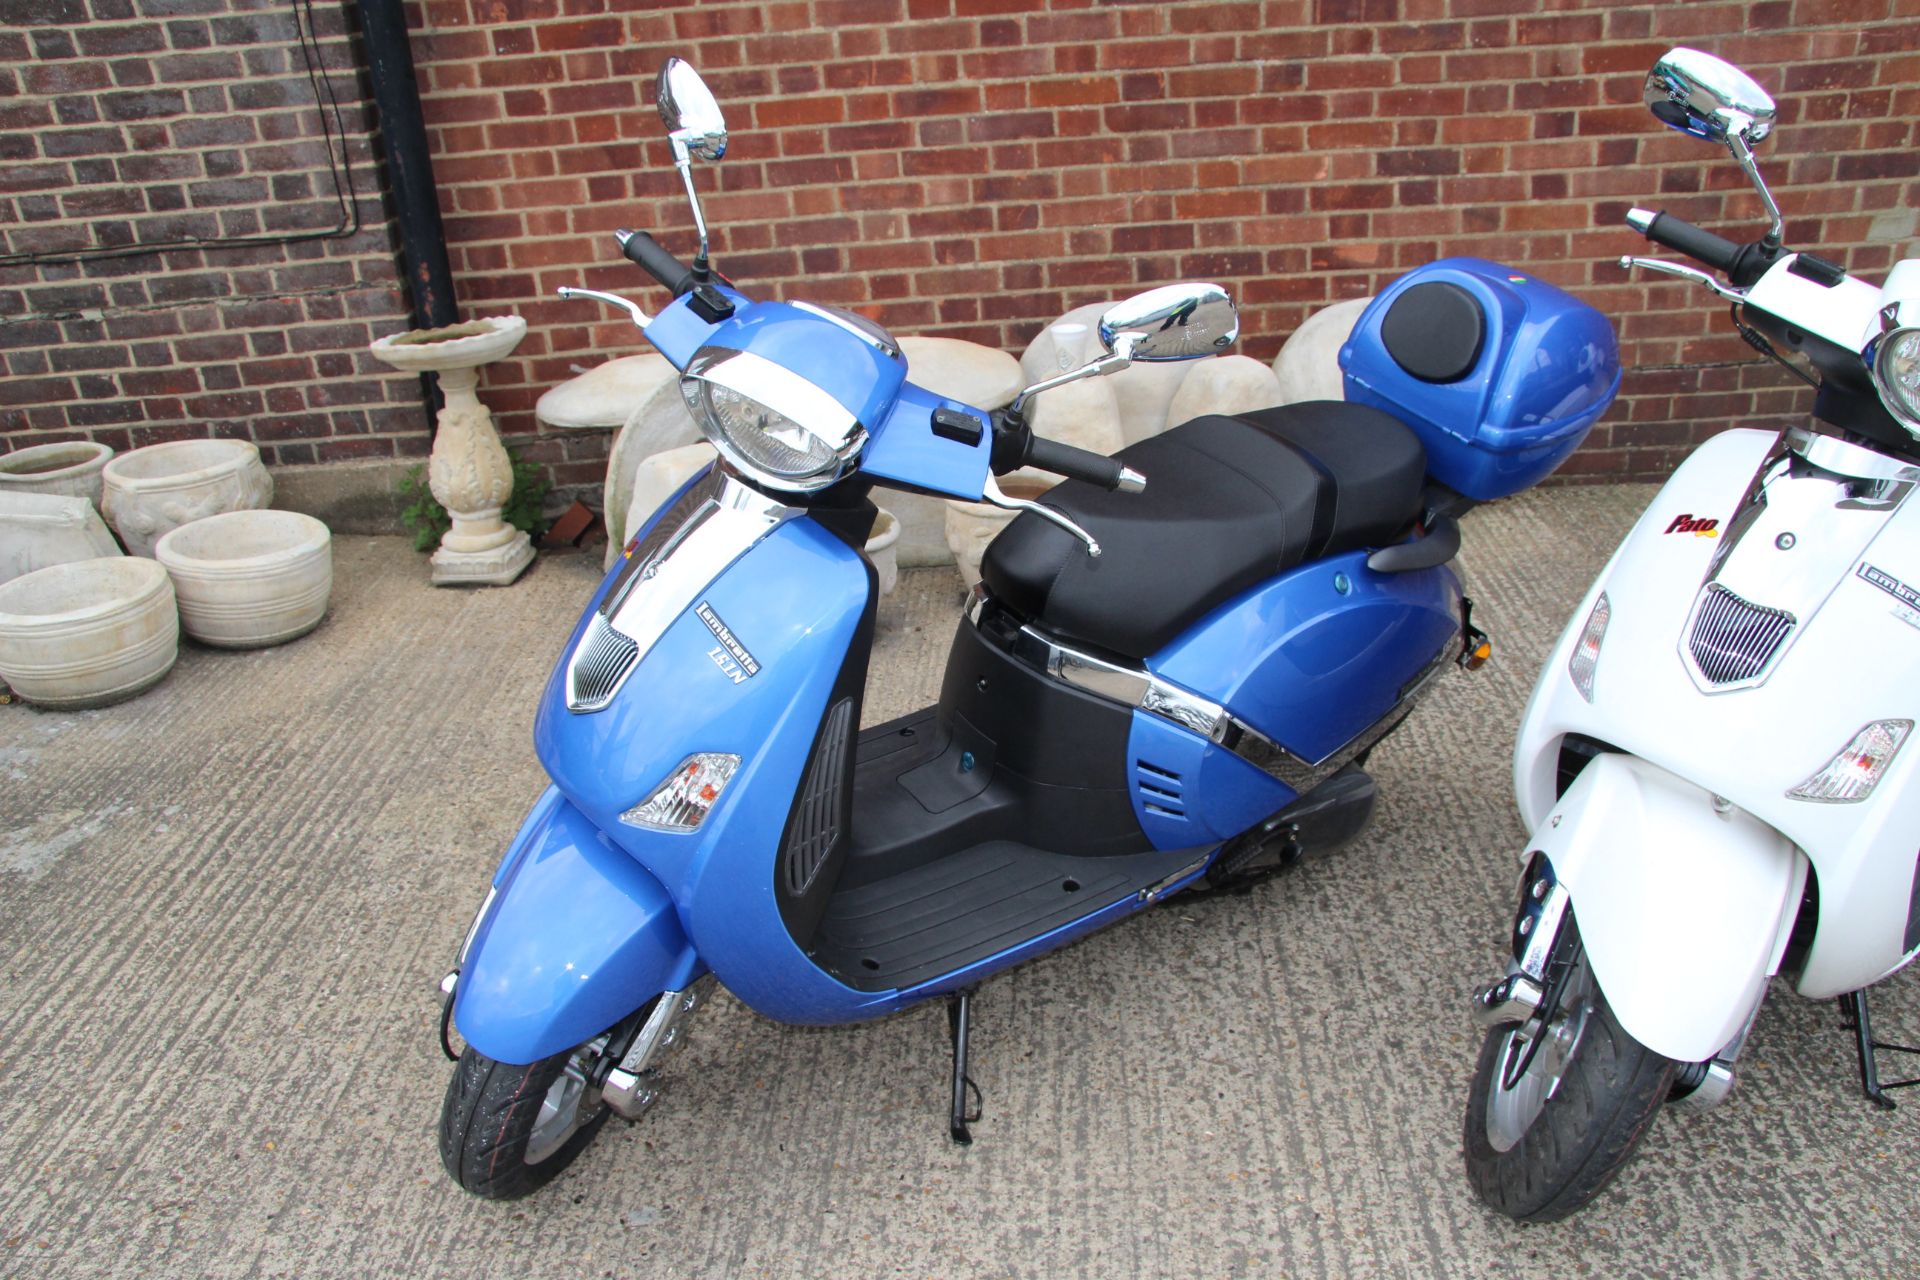 V Brand New Lambretta Pato 151cc Scooter-White -/Mileage 00000 Boxed ISP 1250 (Motorcycle Movers)